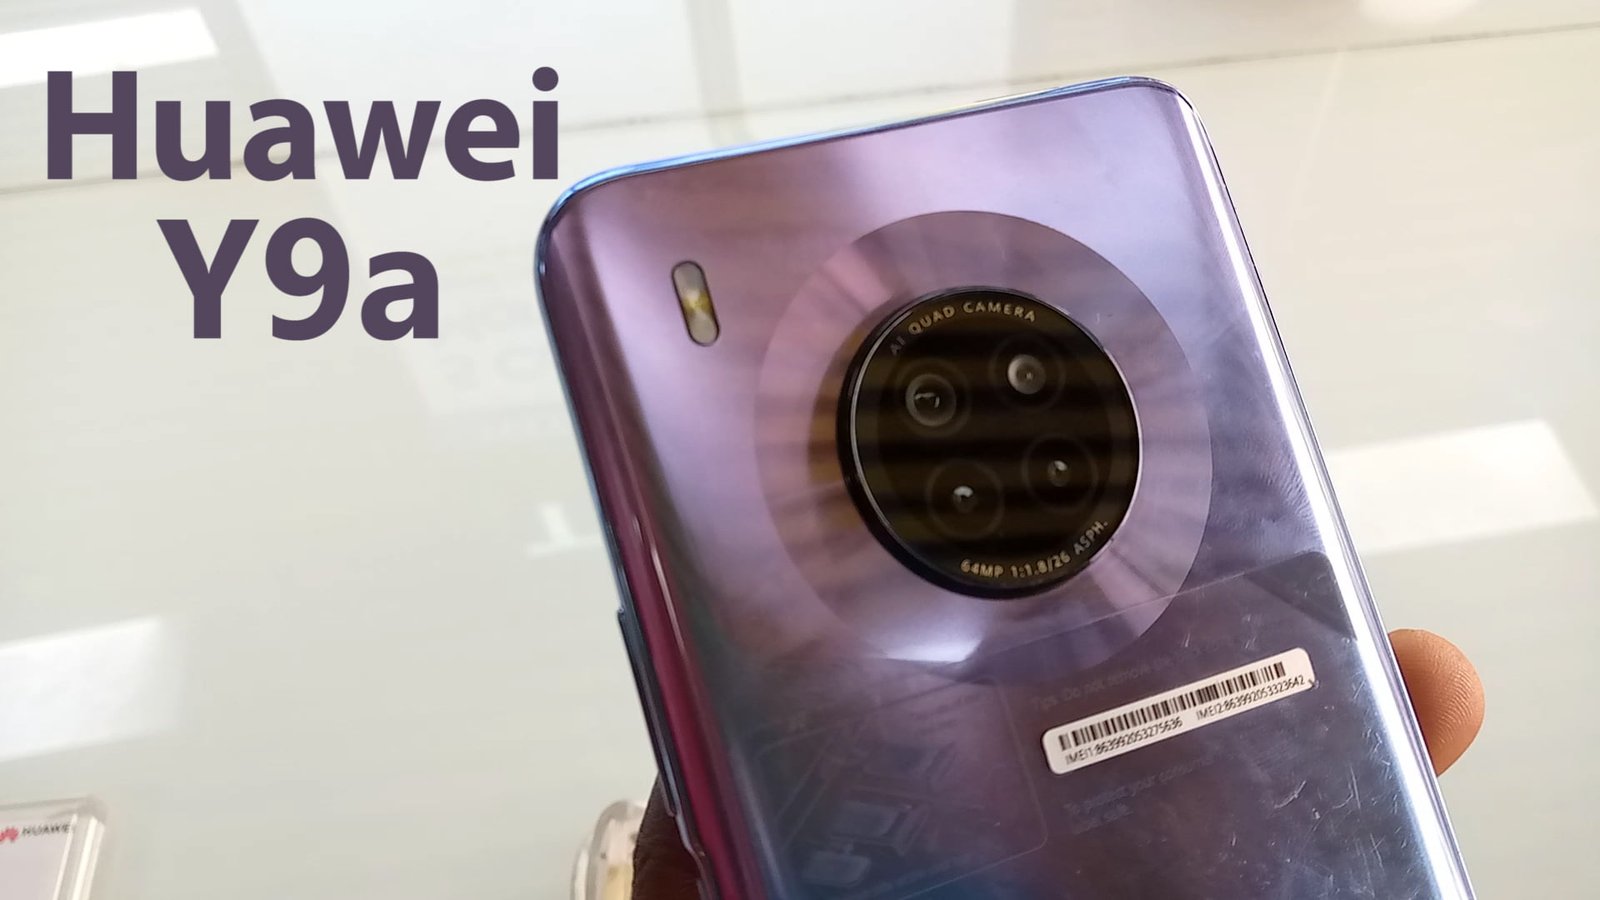 Huawei Y9a Hands On & Quick Review